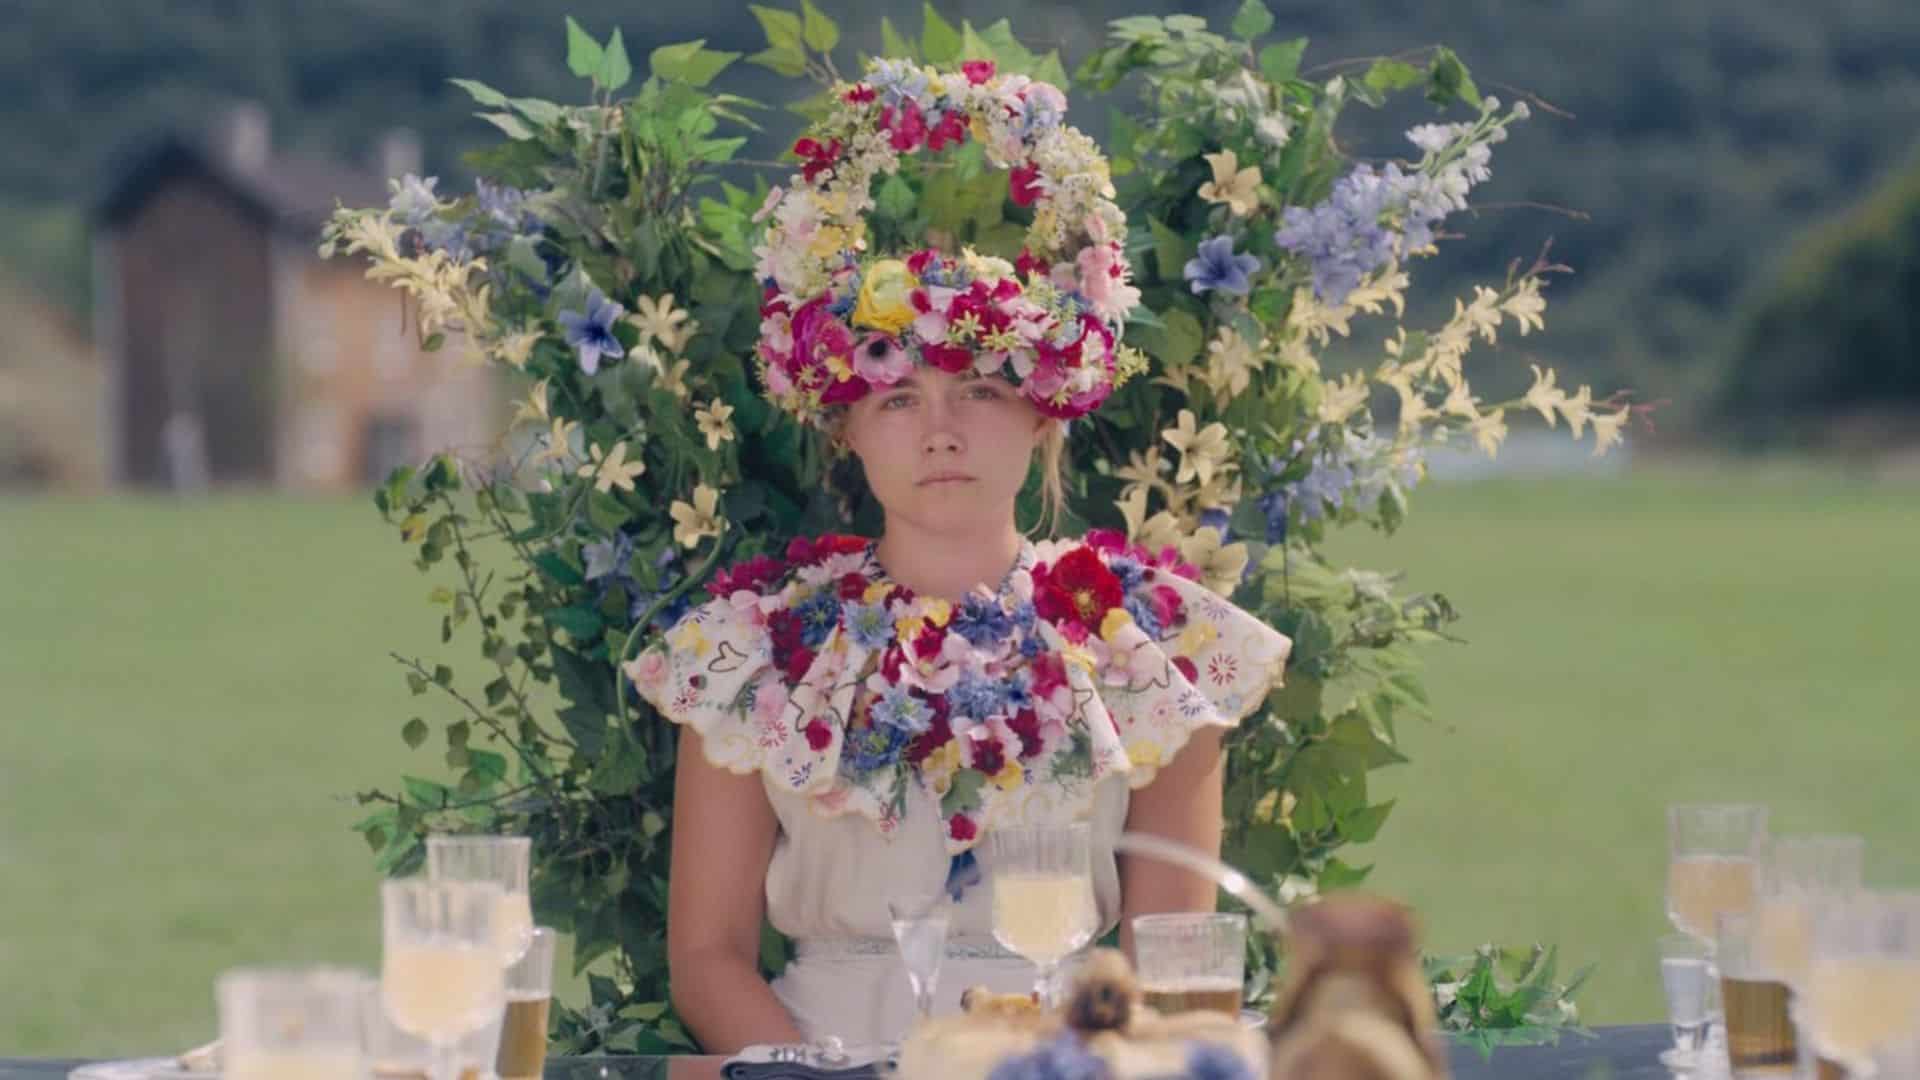 A woman sits at the head of a table adorned with flowers in this image from A24.